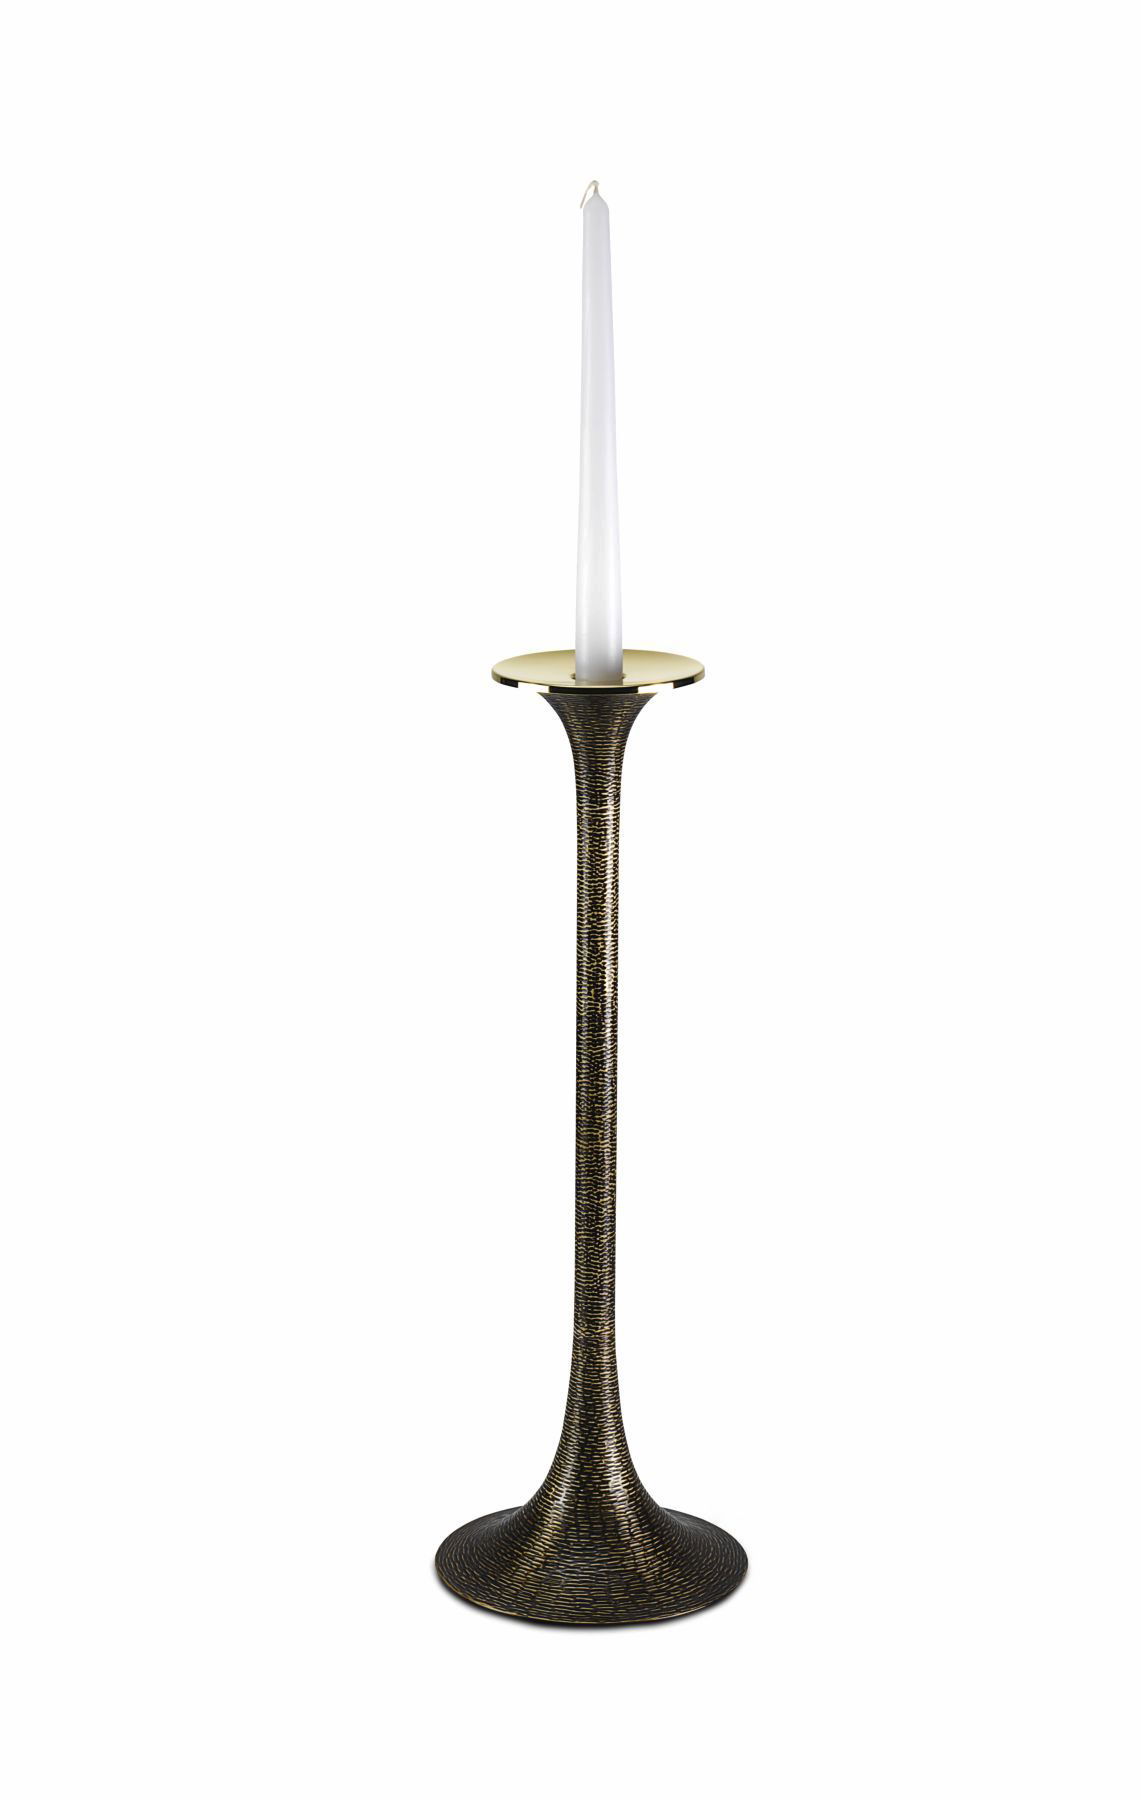 Silver candlestick